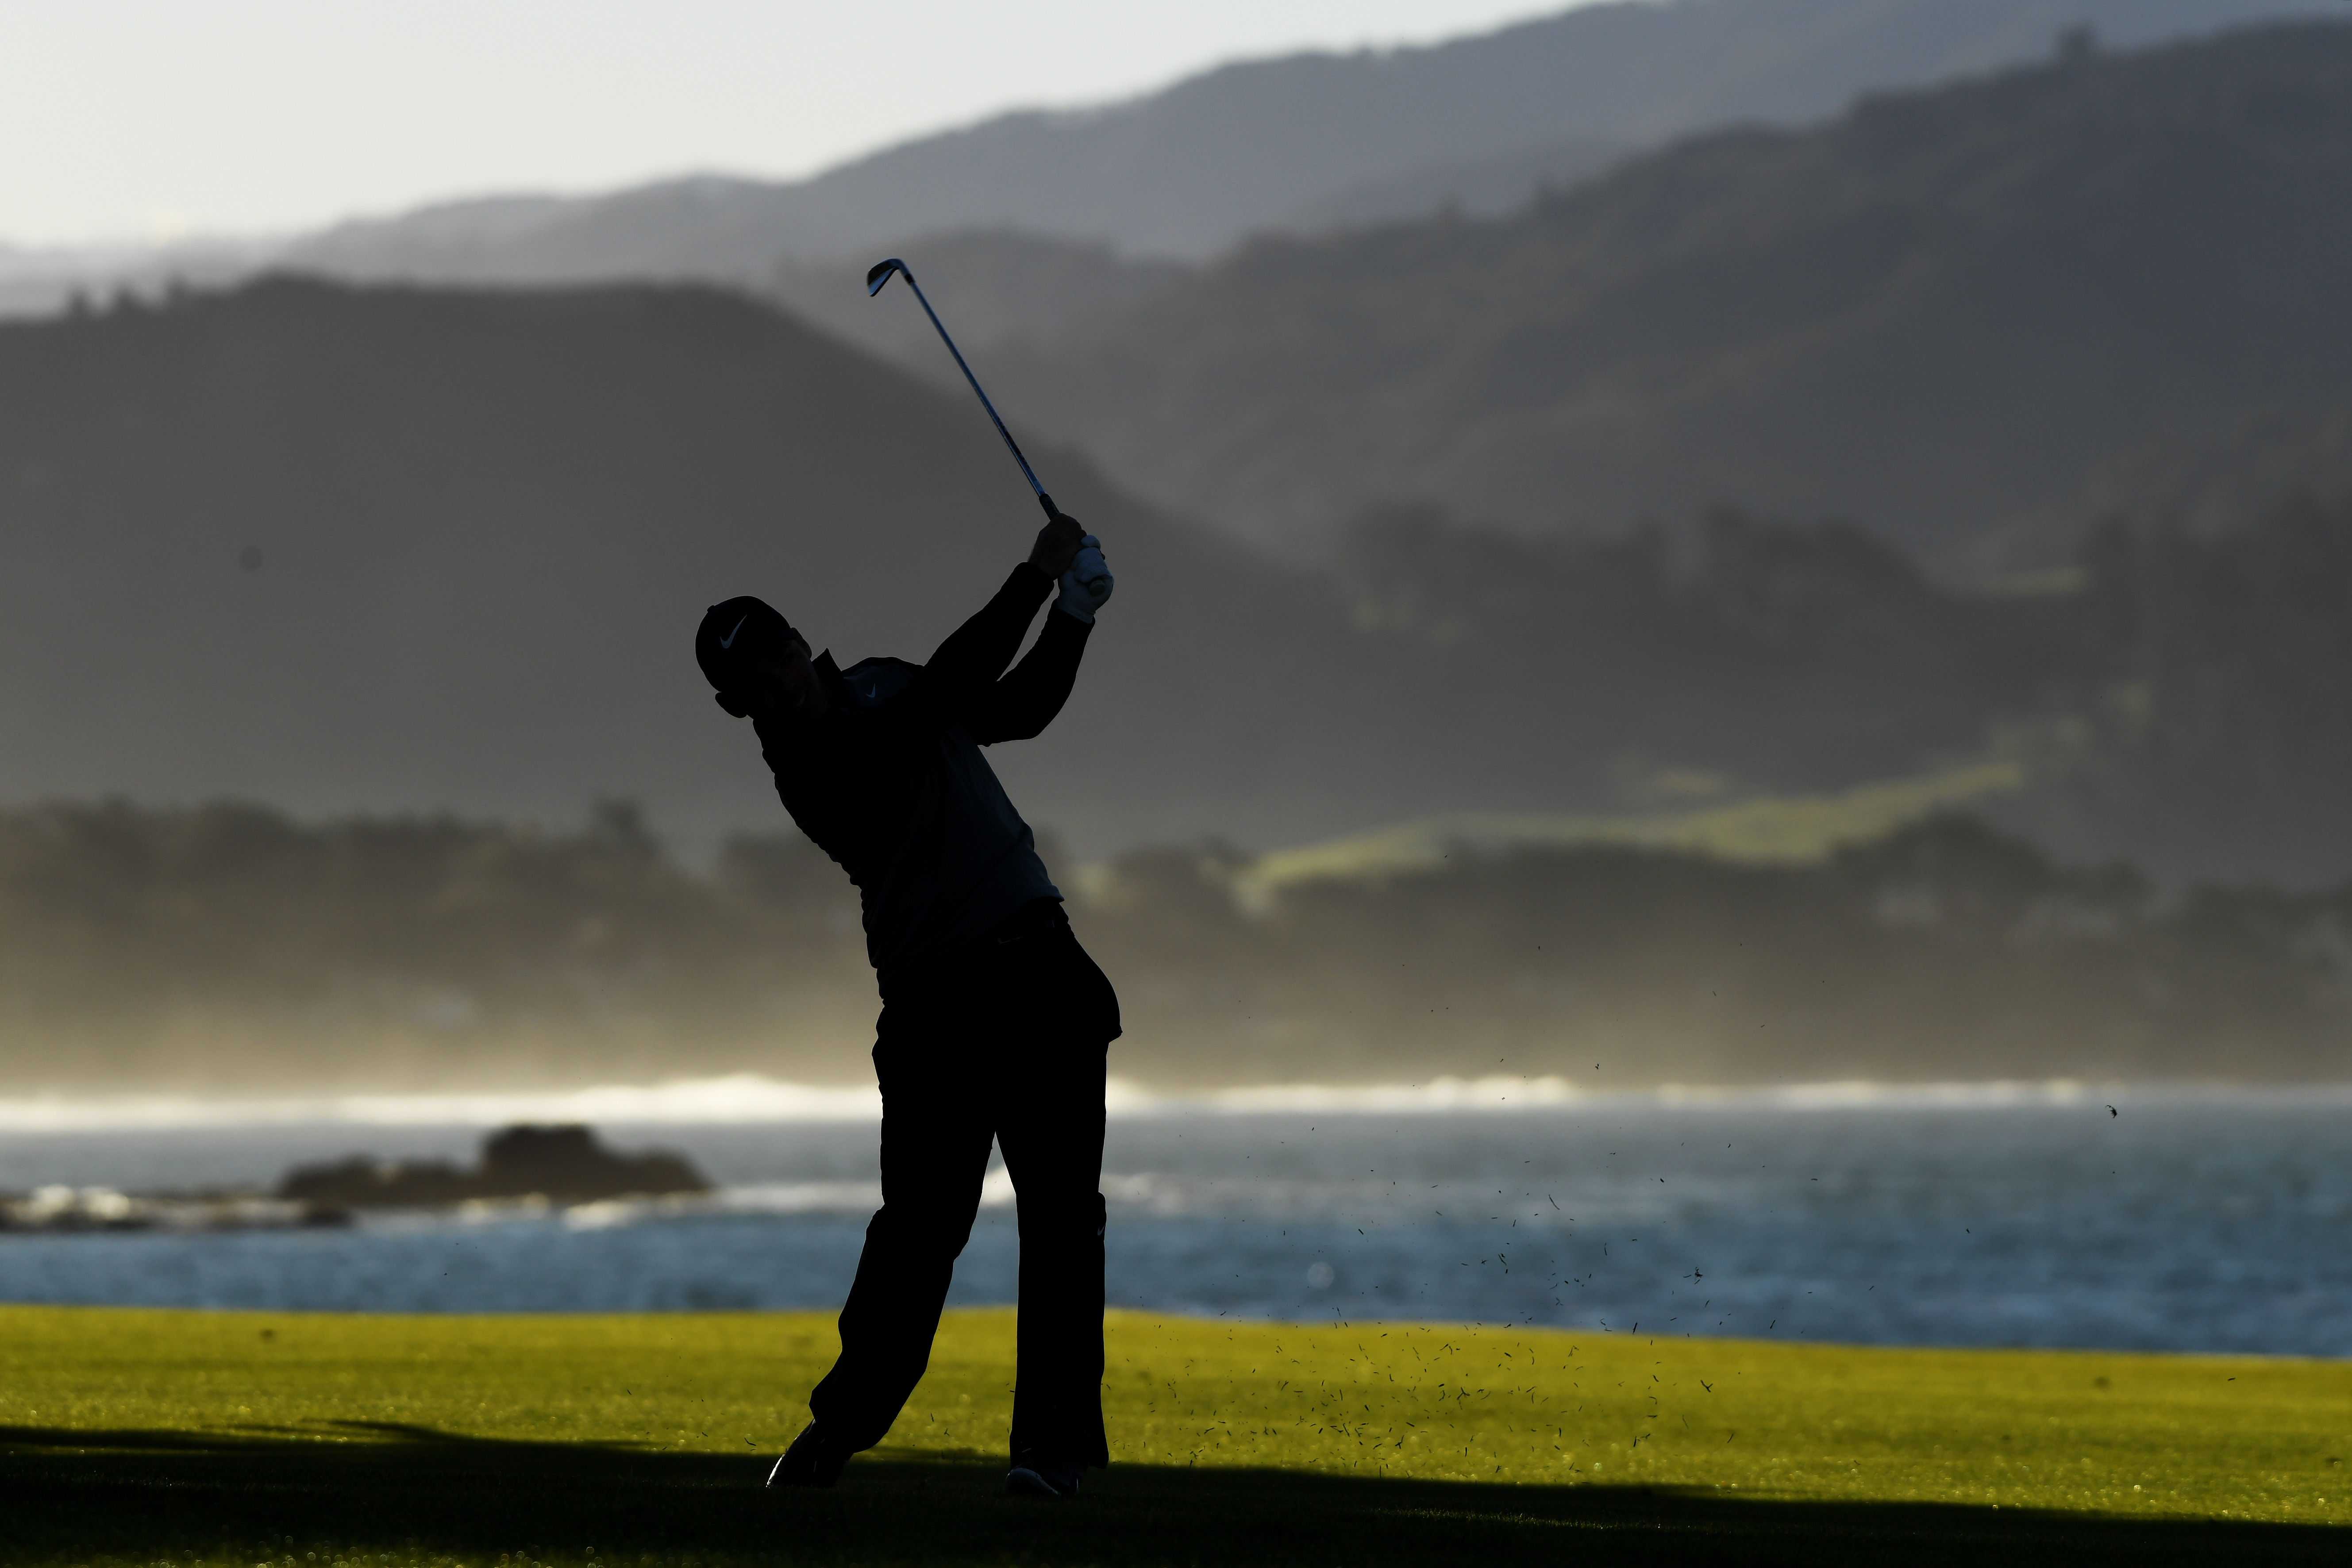 AT&amp;T Pebble Beach Pro-Am - Final Round